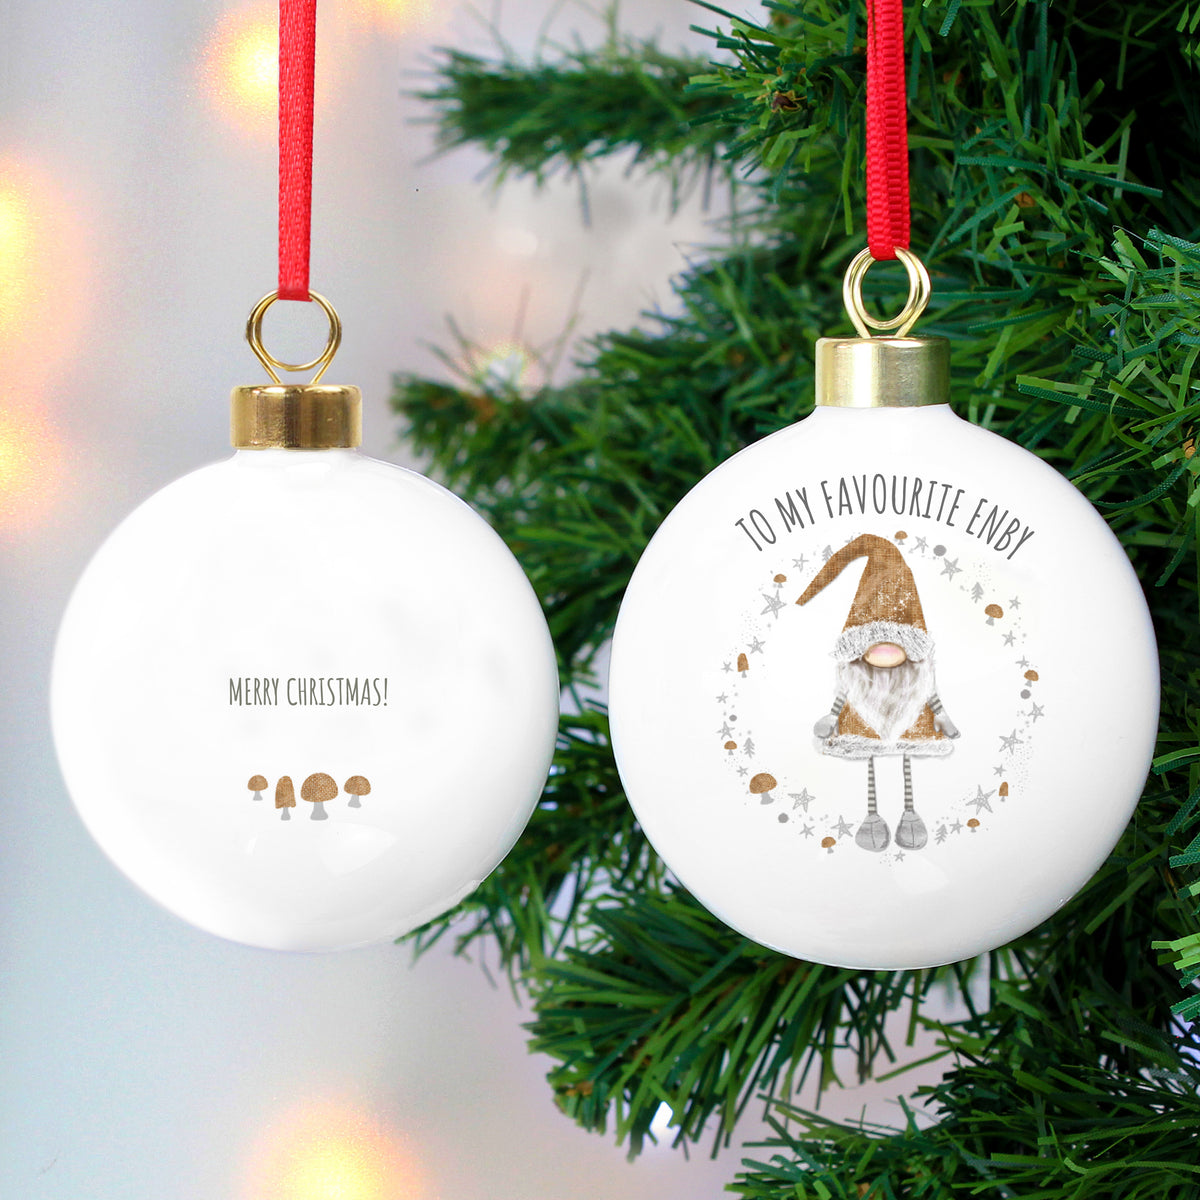 Favourite Enby - Non-Binary Xmas Bauble Decoration | Gift